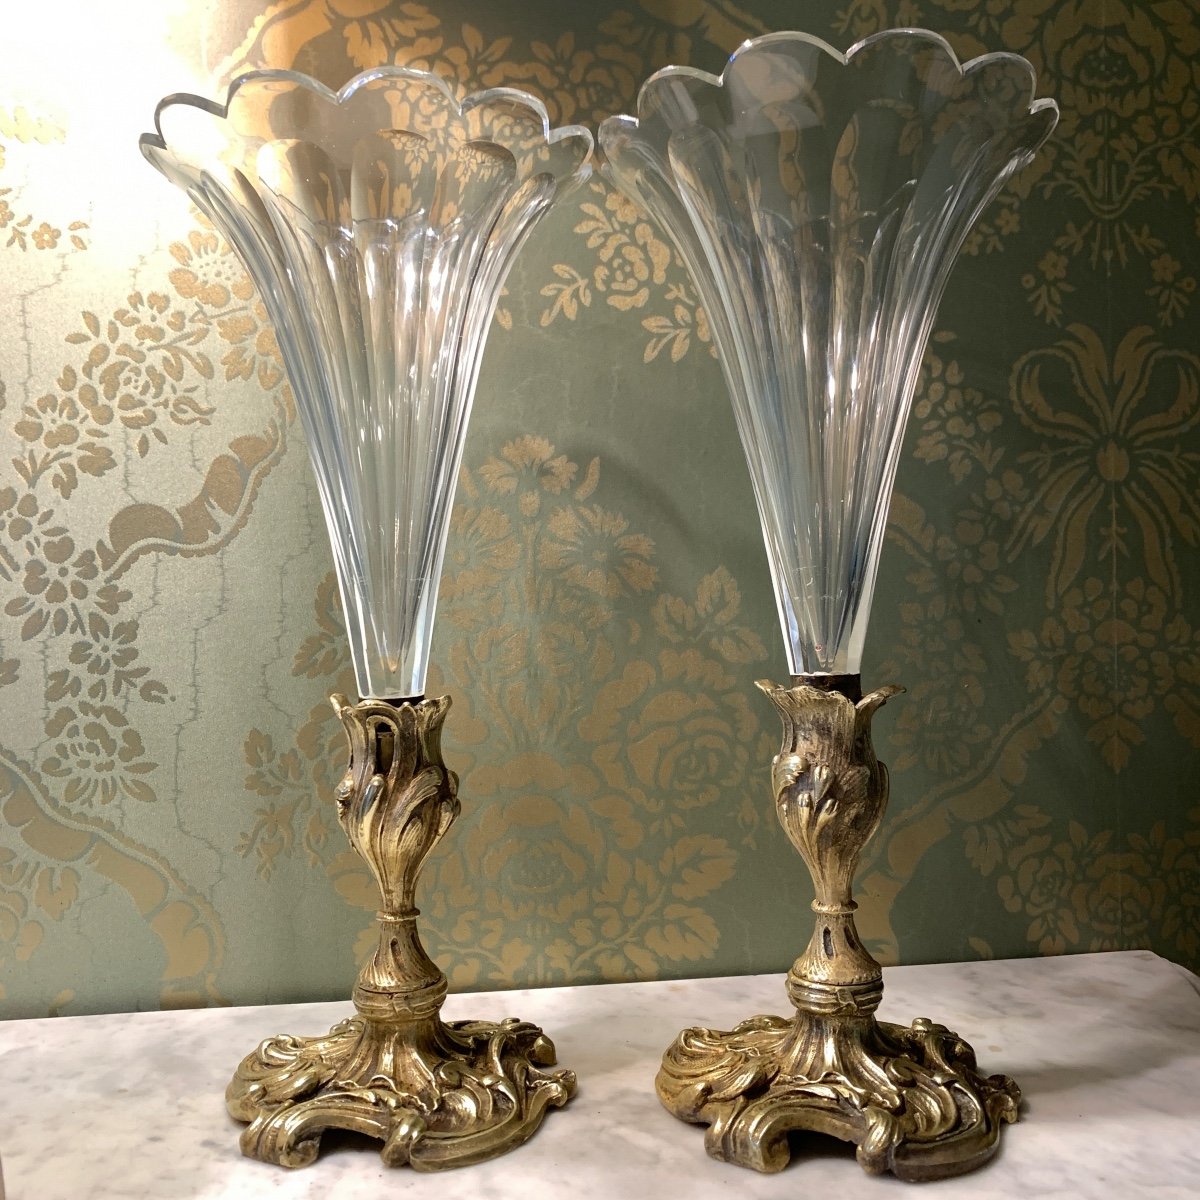 Pair Of Gilded Bronze And Crystal Soliflores Horn Vases 20th Century-photo-1